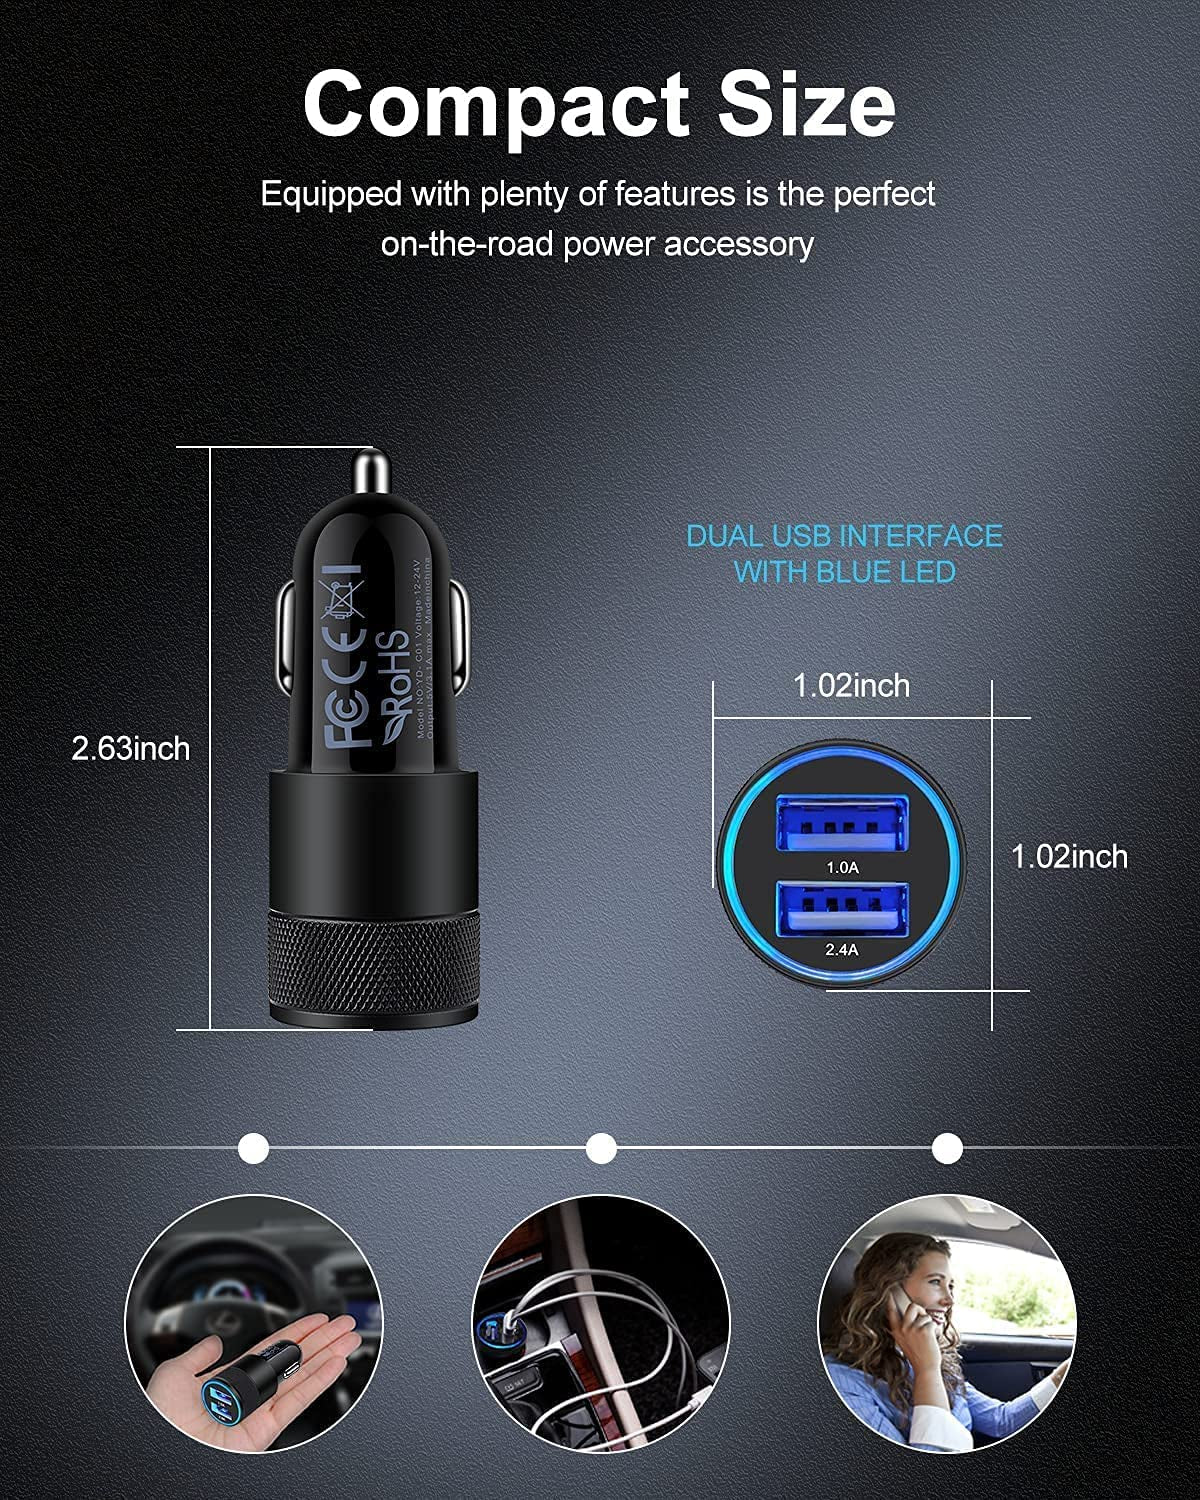 Dual Port USB Car Charger, [2 Pack/3.4A] High-Speed Charging Lighter Adapter for Cellphones